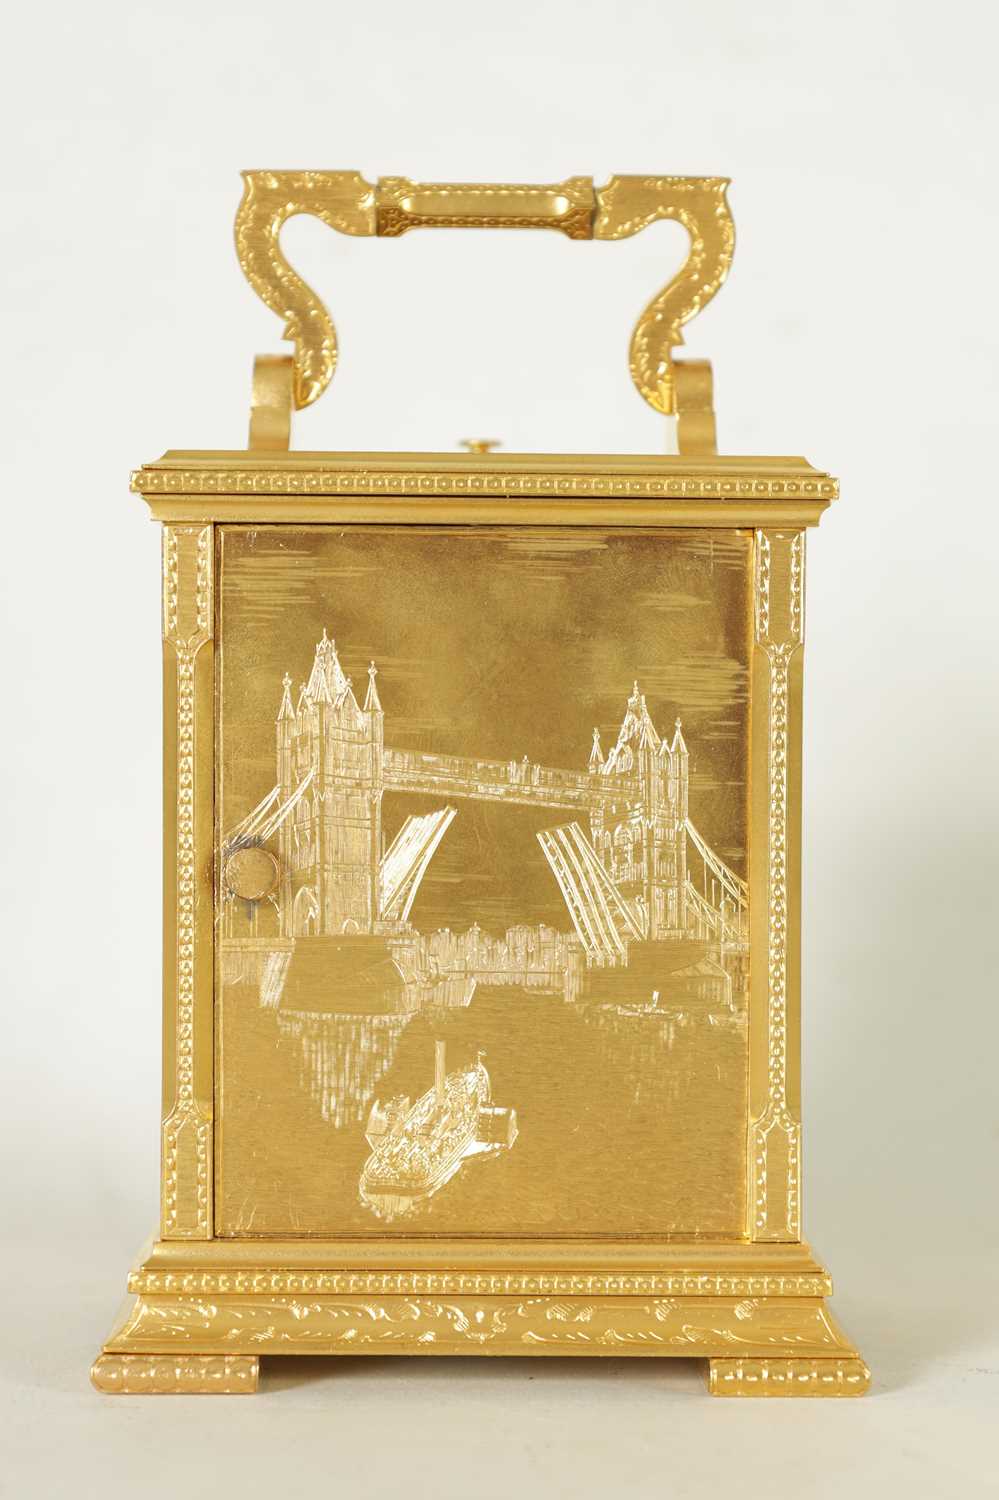 A FINELY ENGRAVED ENGLISH CASED REPEATING CARRIAGE CLOCK - Image 6 of 8